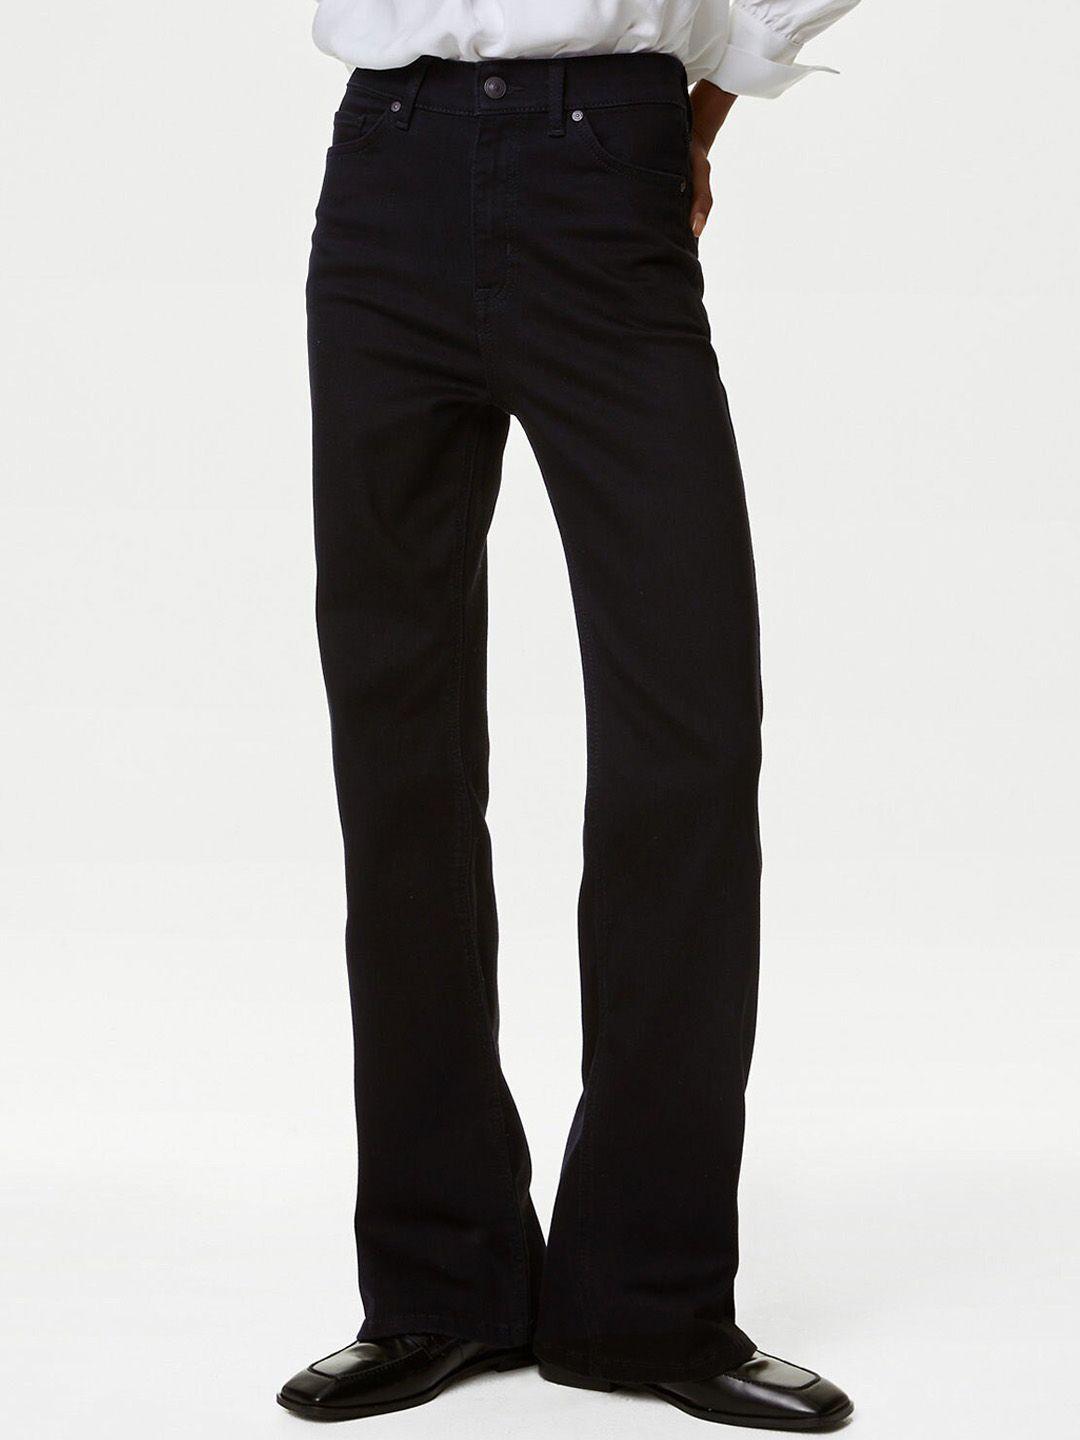 marks-&-spencer-women-flared-high-rise-clean-look-stretchable-jeans